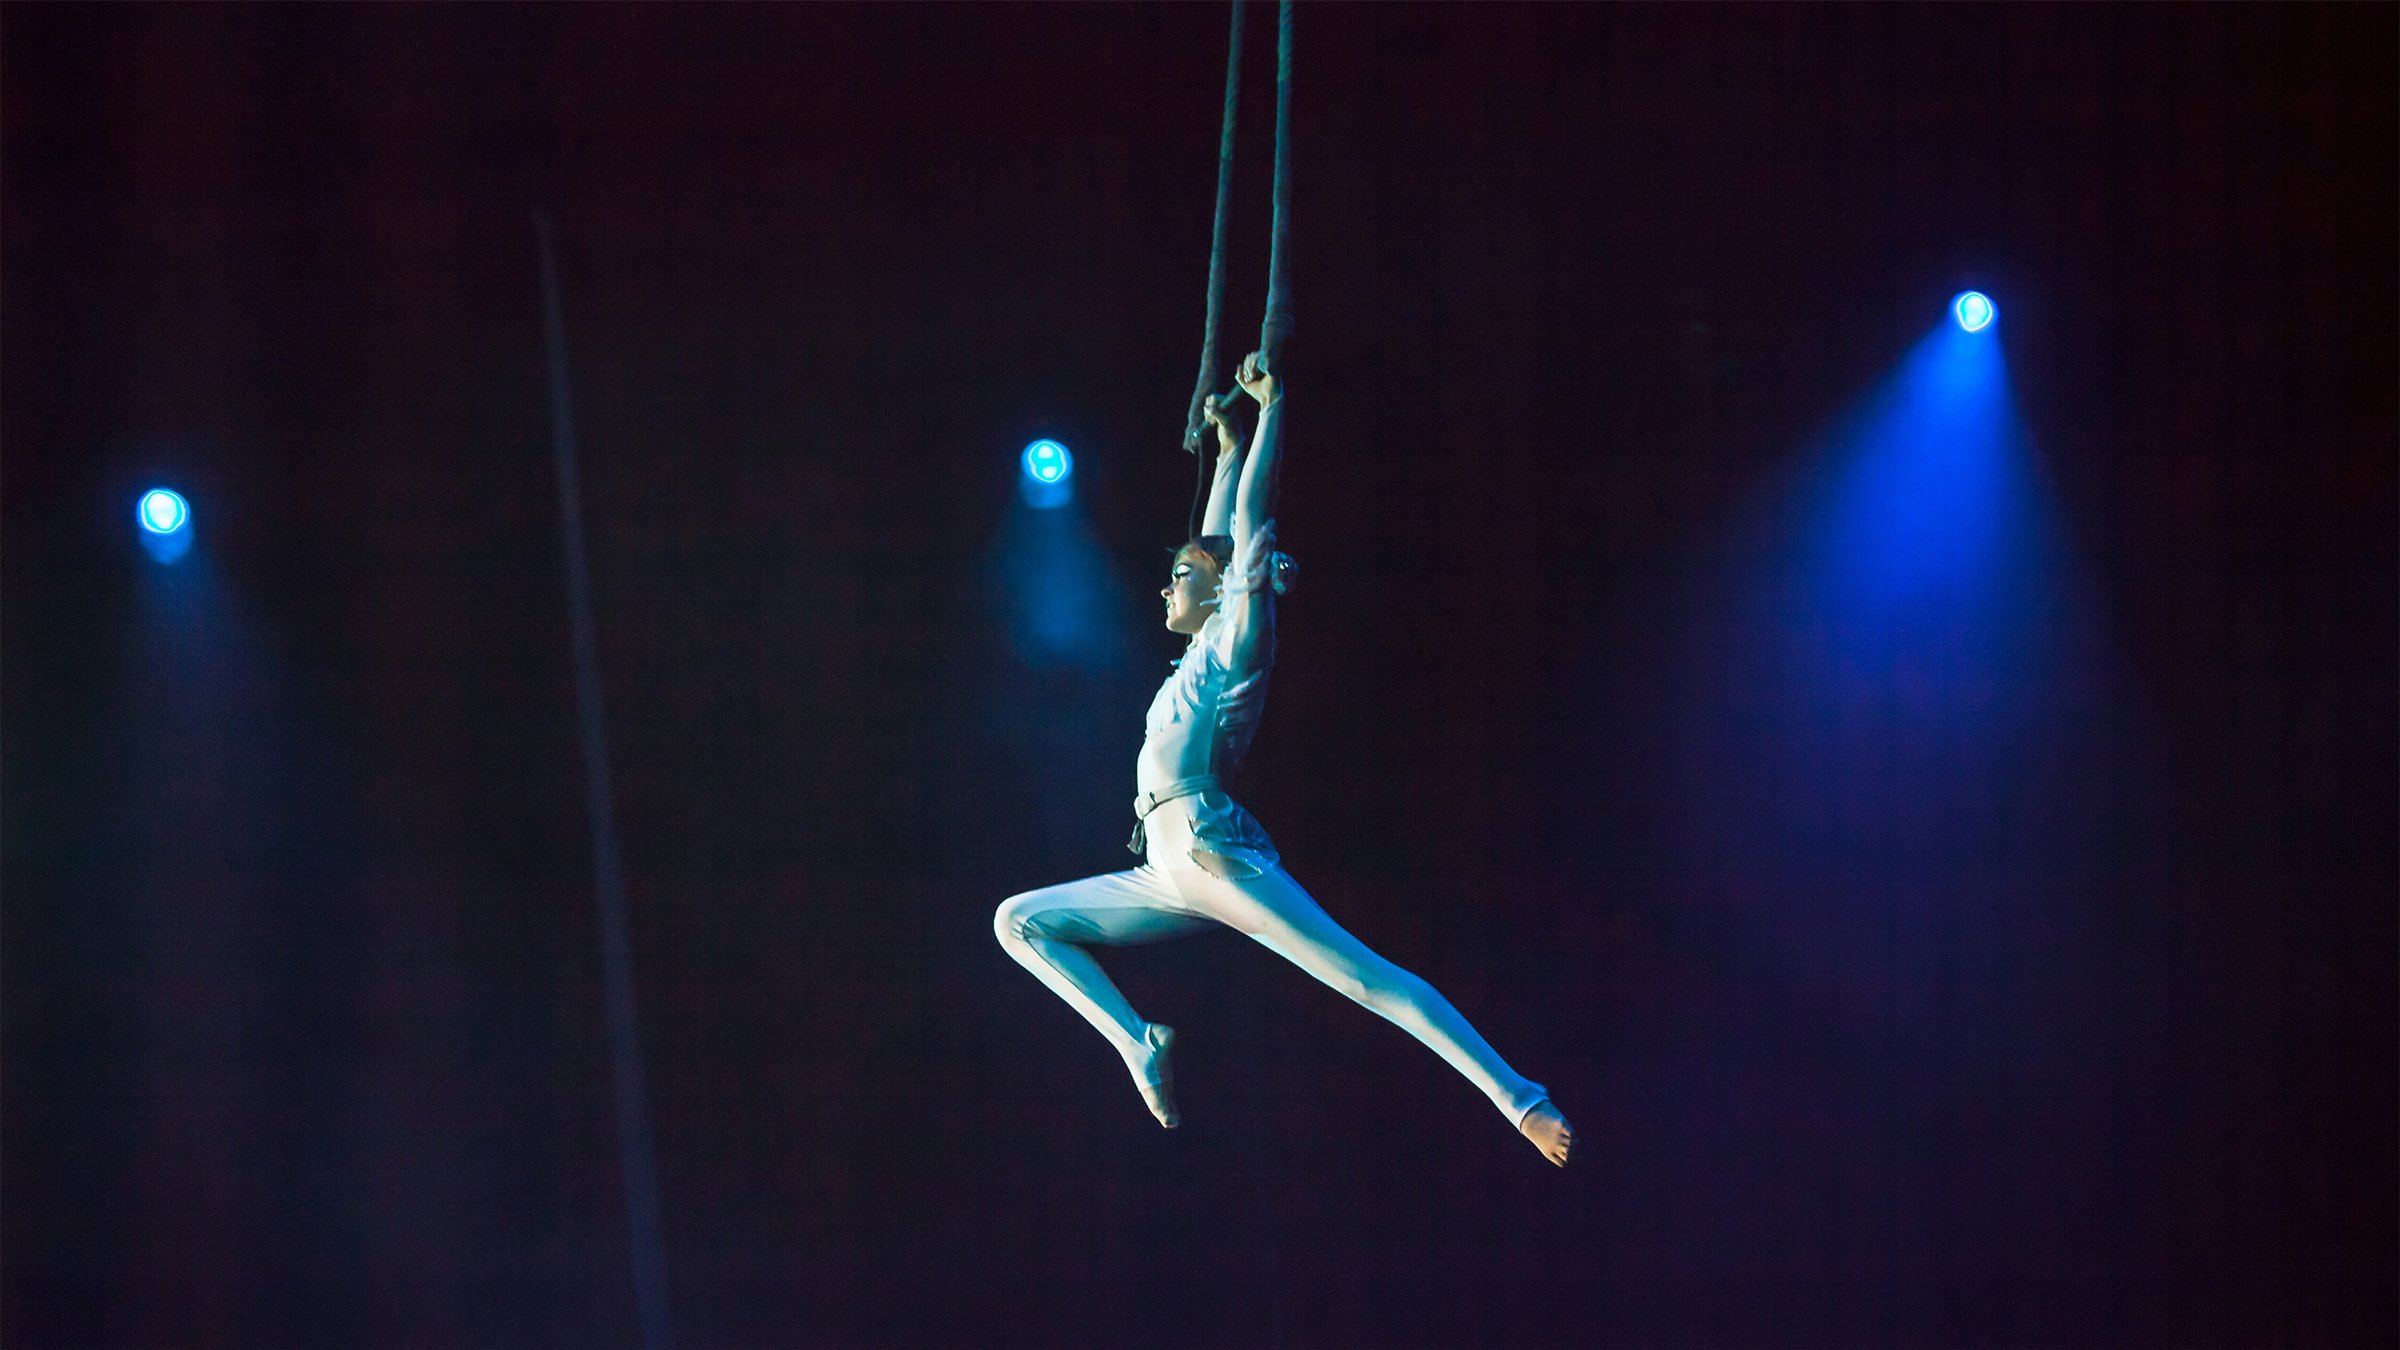 Acrobat swinging on stage with blue stage lights